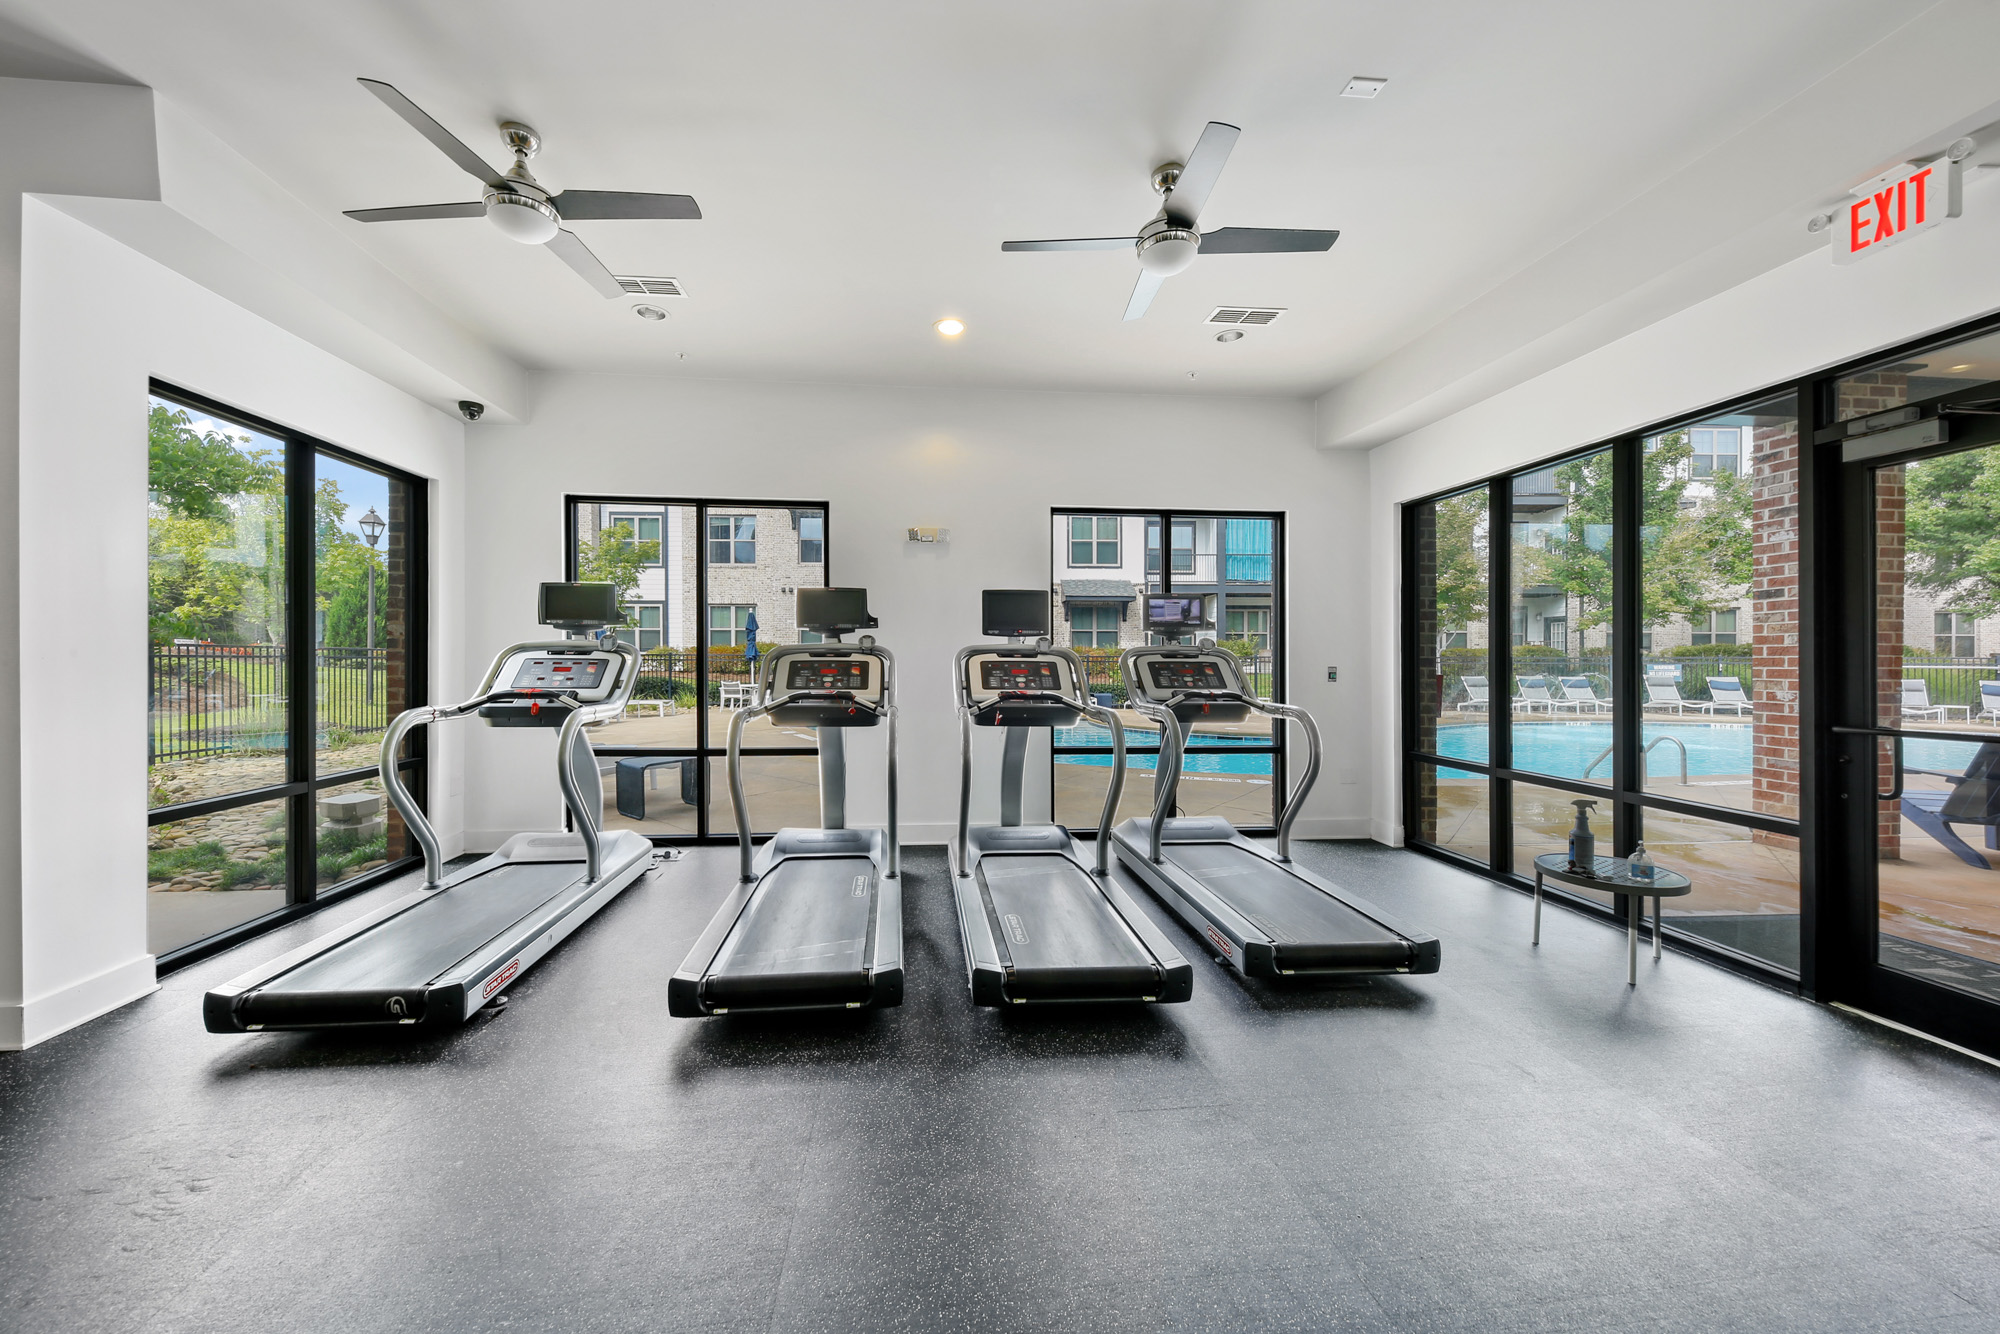 Four treadmills look out to a pool deck at Park 9 apartments in Woodstock, GA.